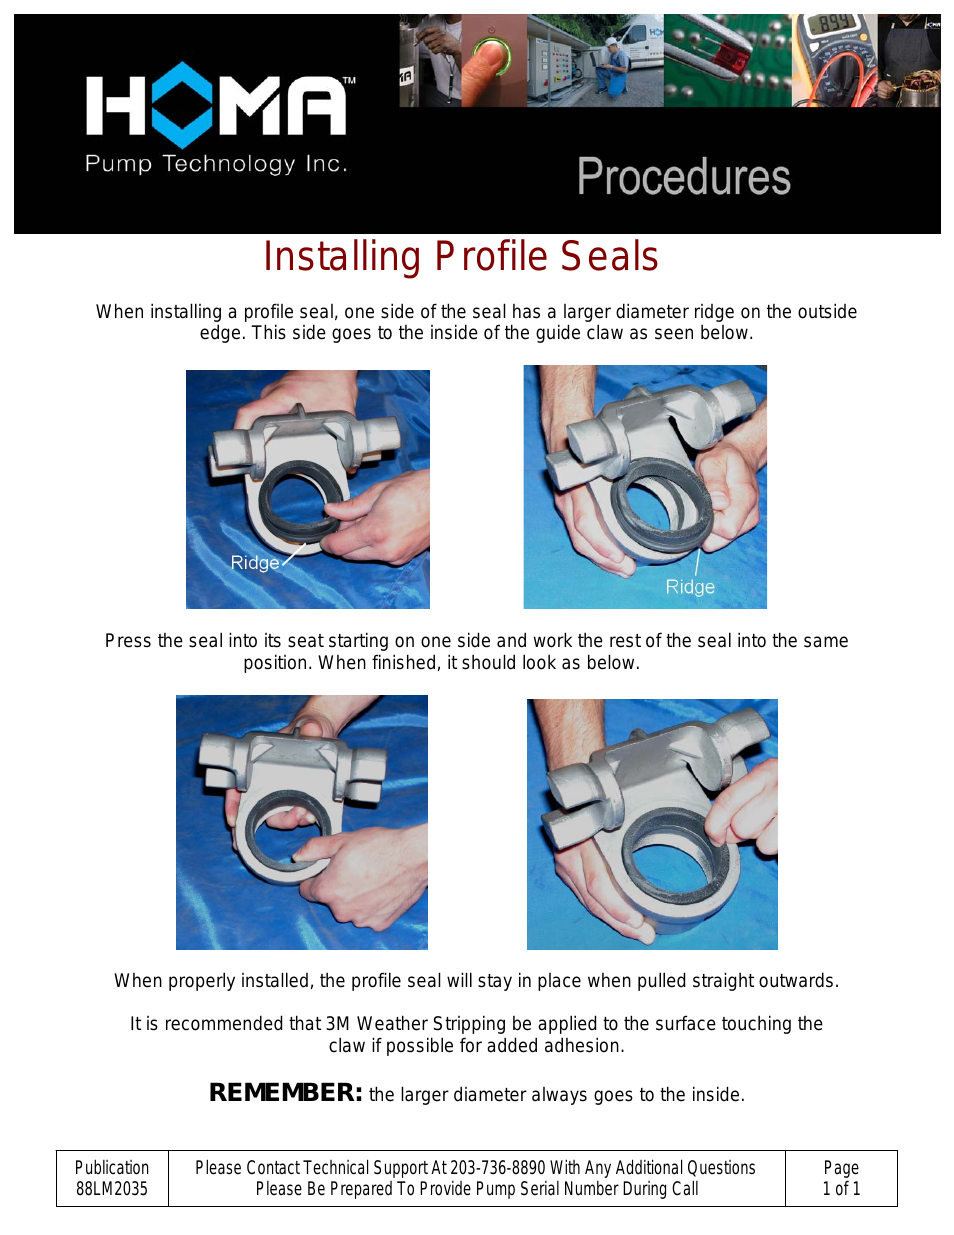 Installing Profile Seals up to 6 inch